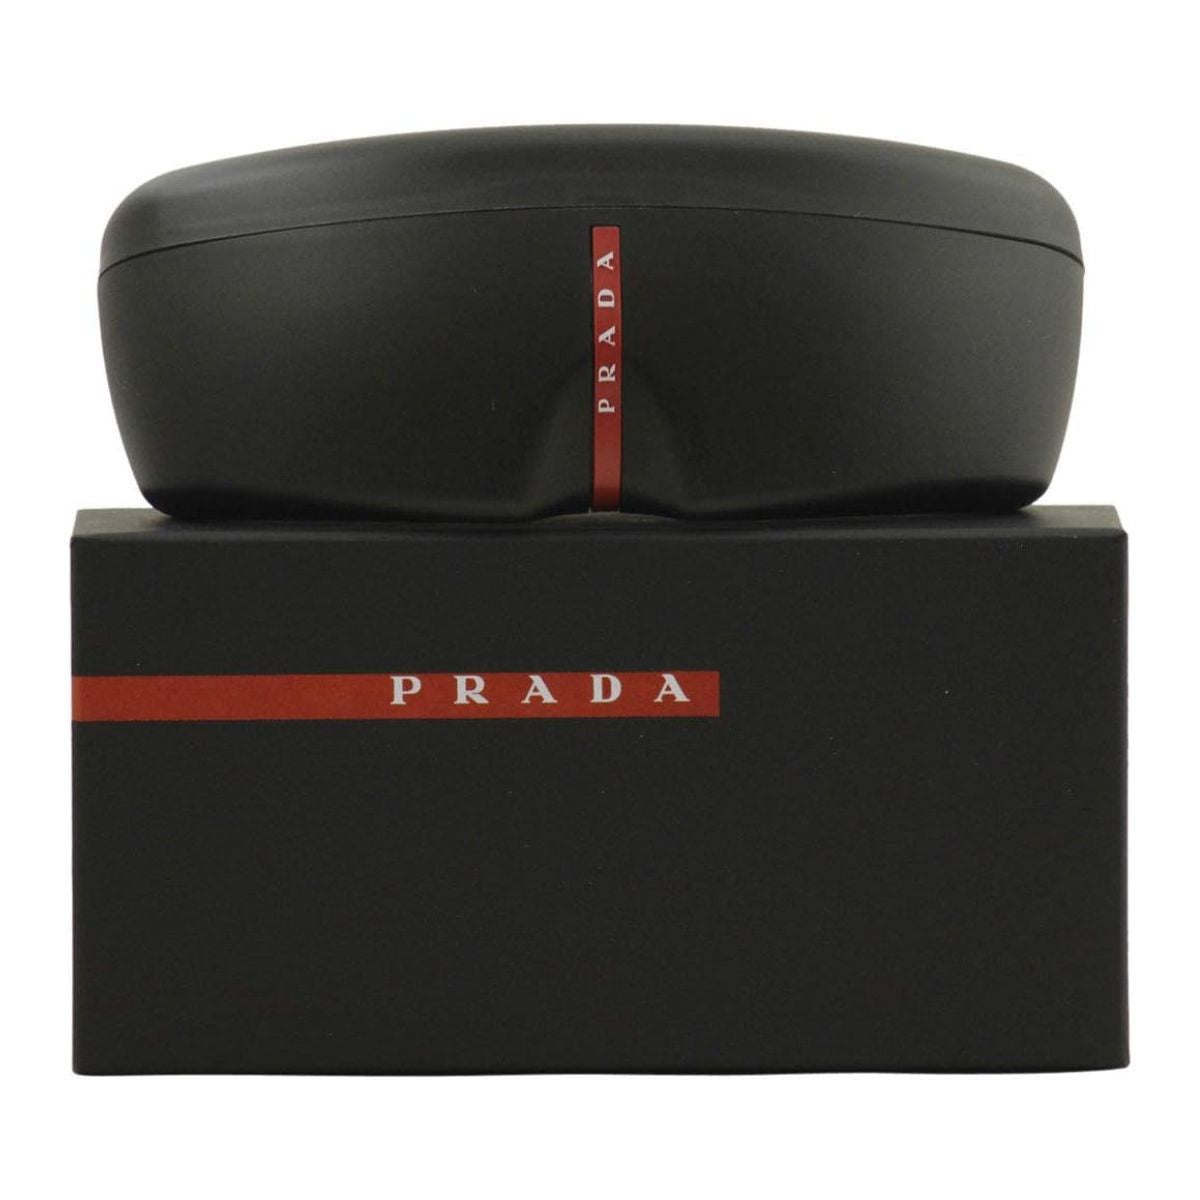 "Shop the latest collection of Prada sunglasses for men, including the sleek SpS05V 1BO-5S0 model with a square grey frame. Find your perfect pair at Optorium."